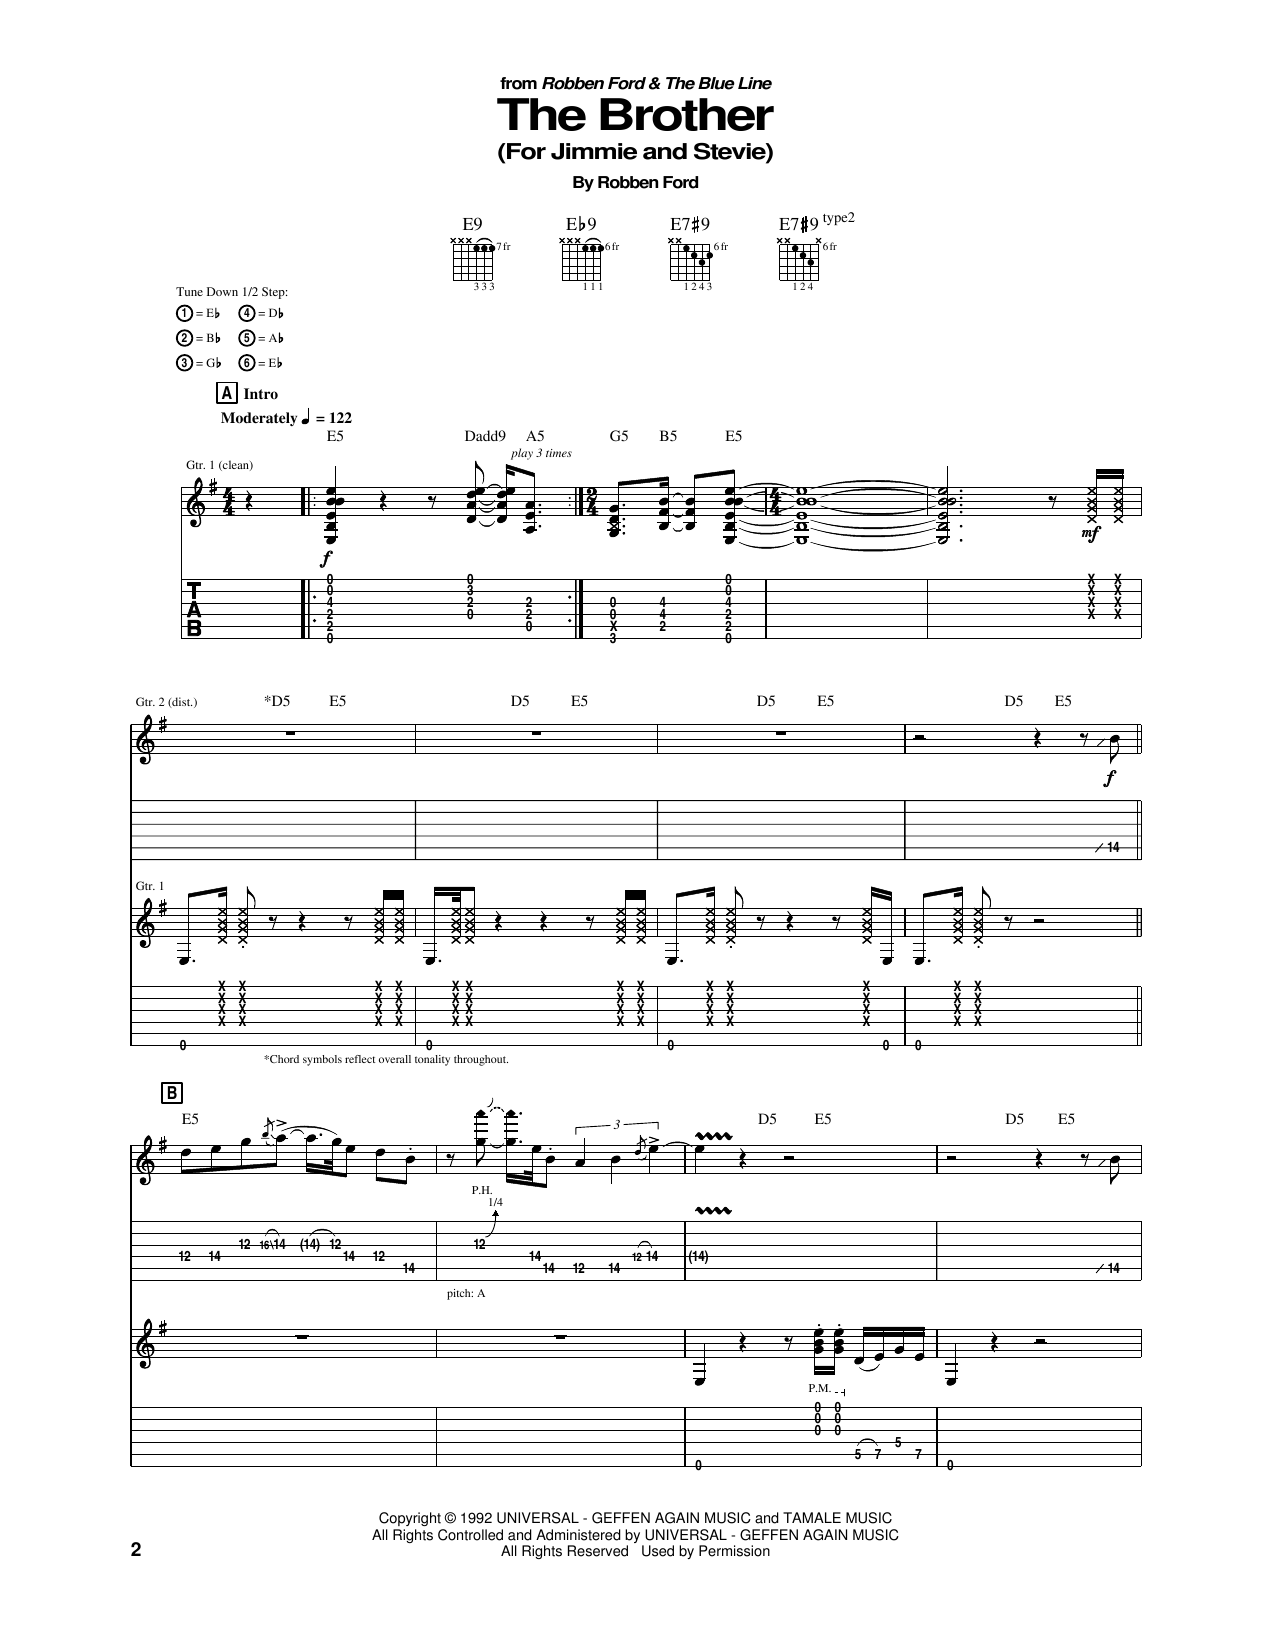 Download Robben Ford The Brother (For Jimmie and Stevie) Sheet Music